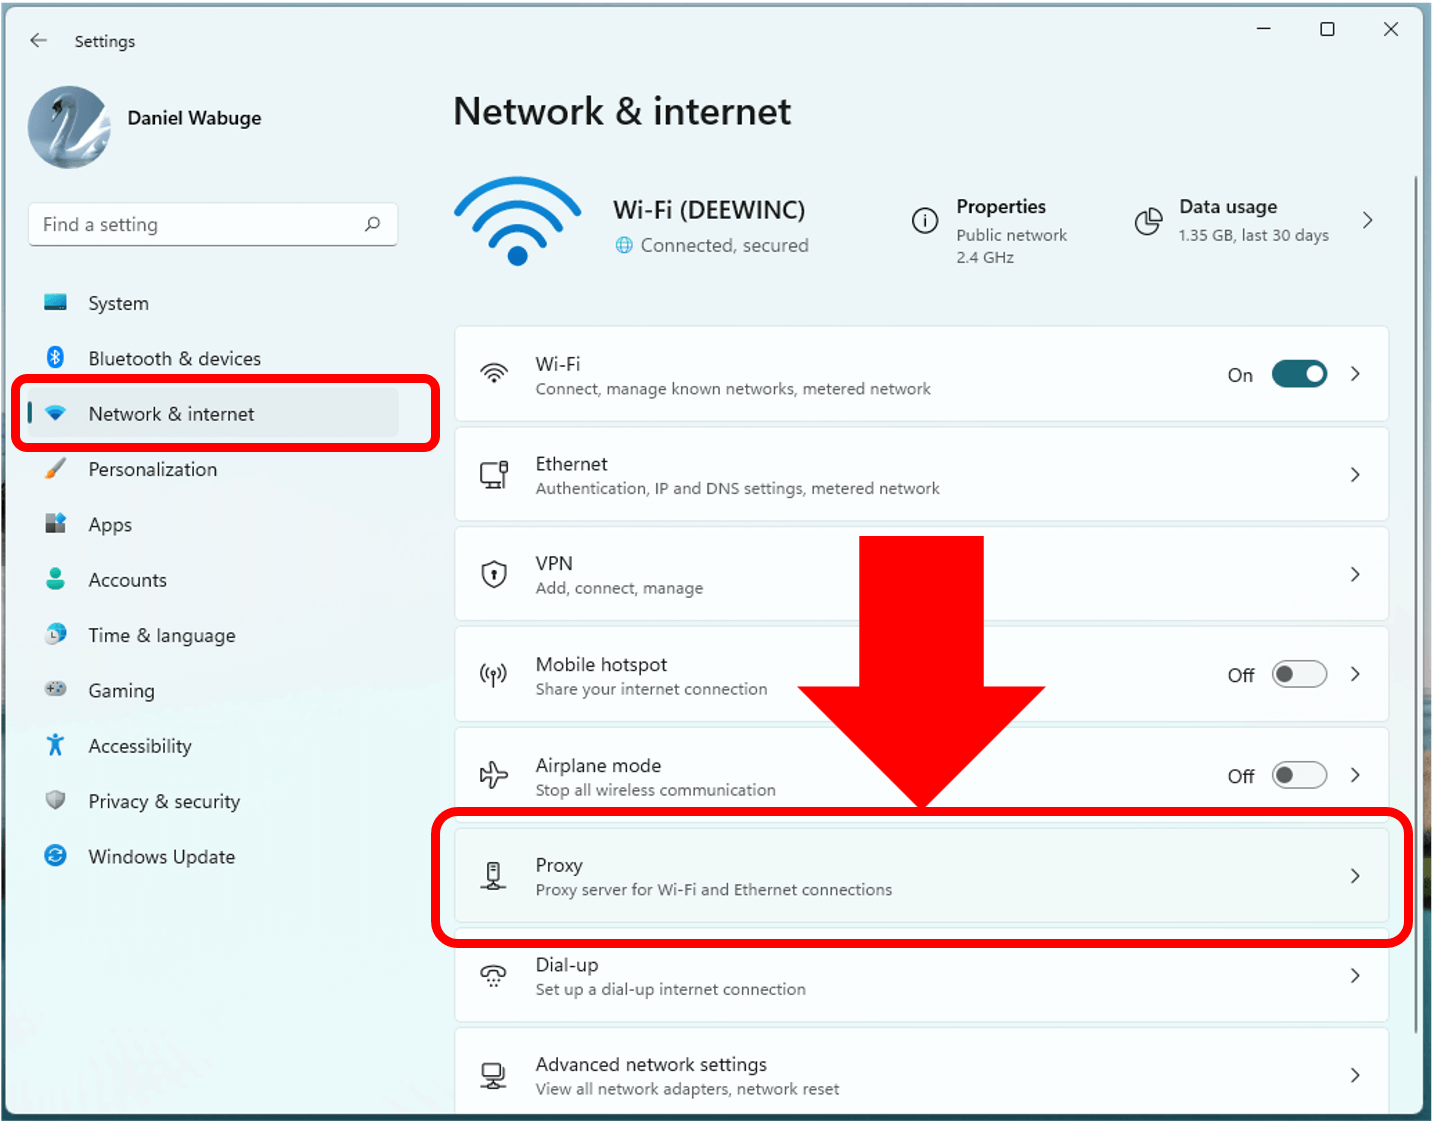 Go to "Network & internet" or "Connections".
Find the VPN or proxy settings and turn them off.